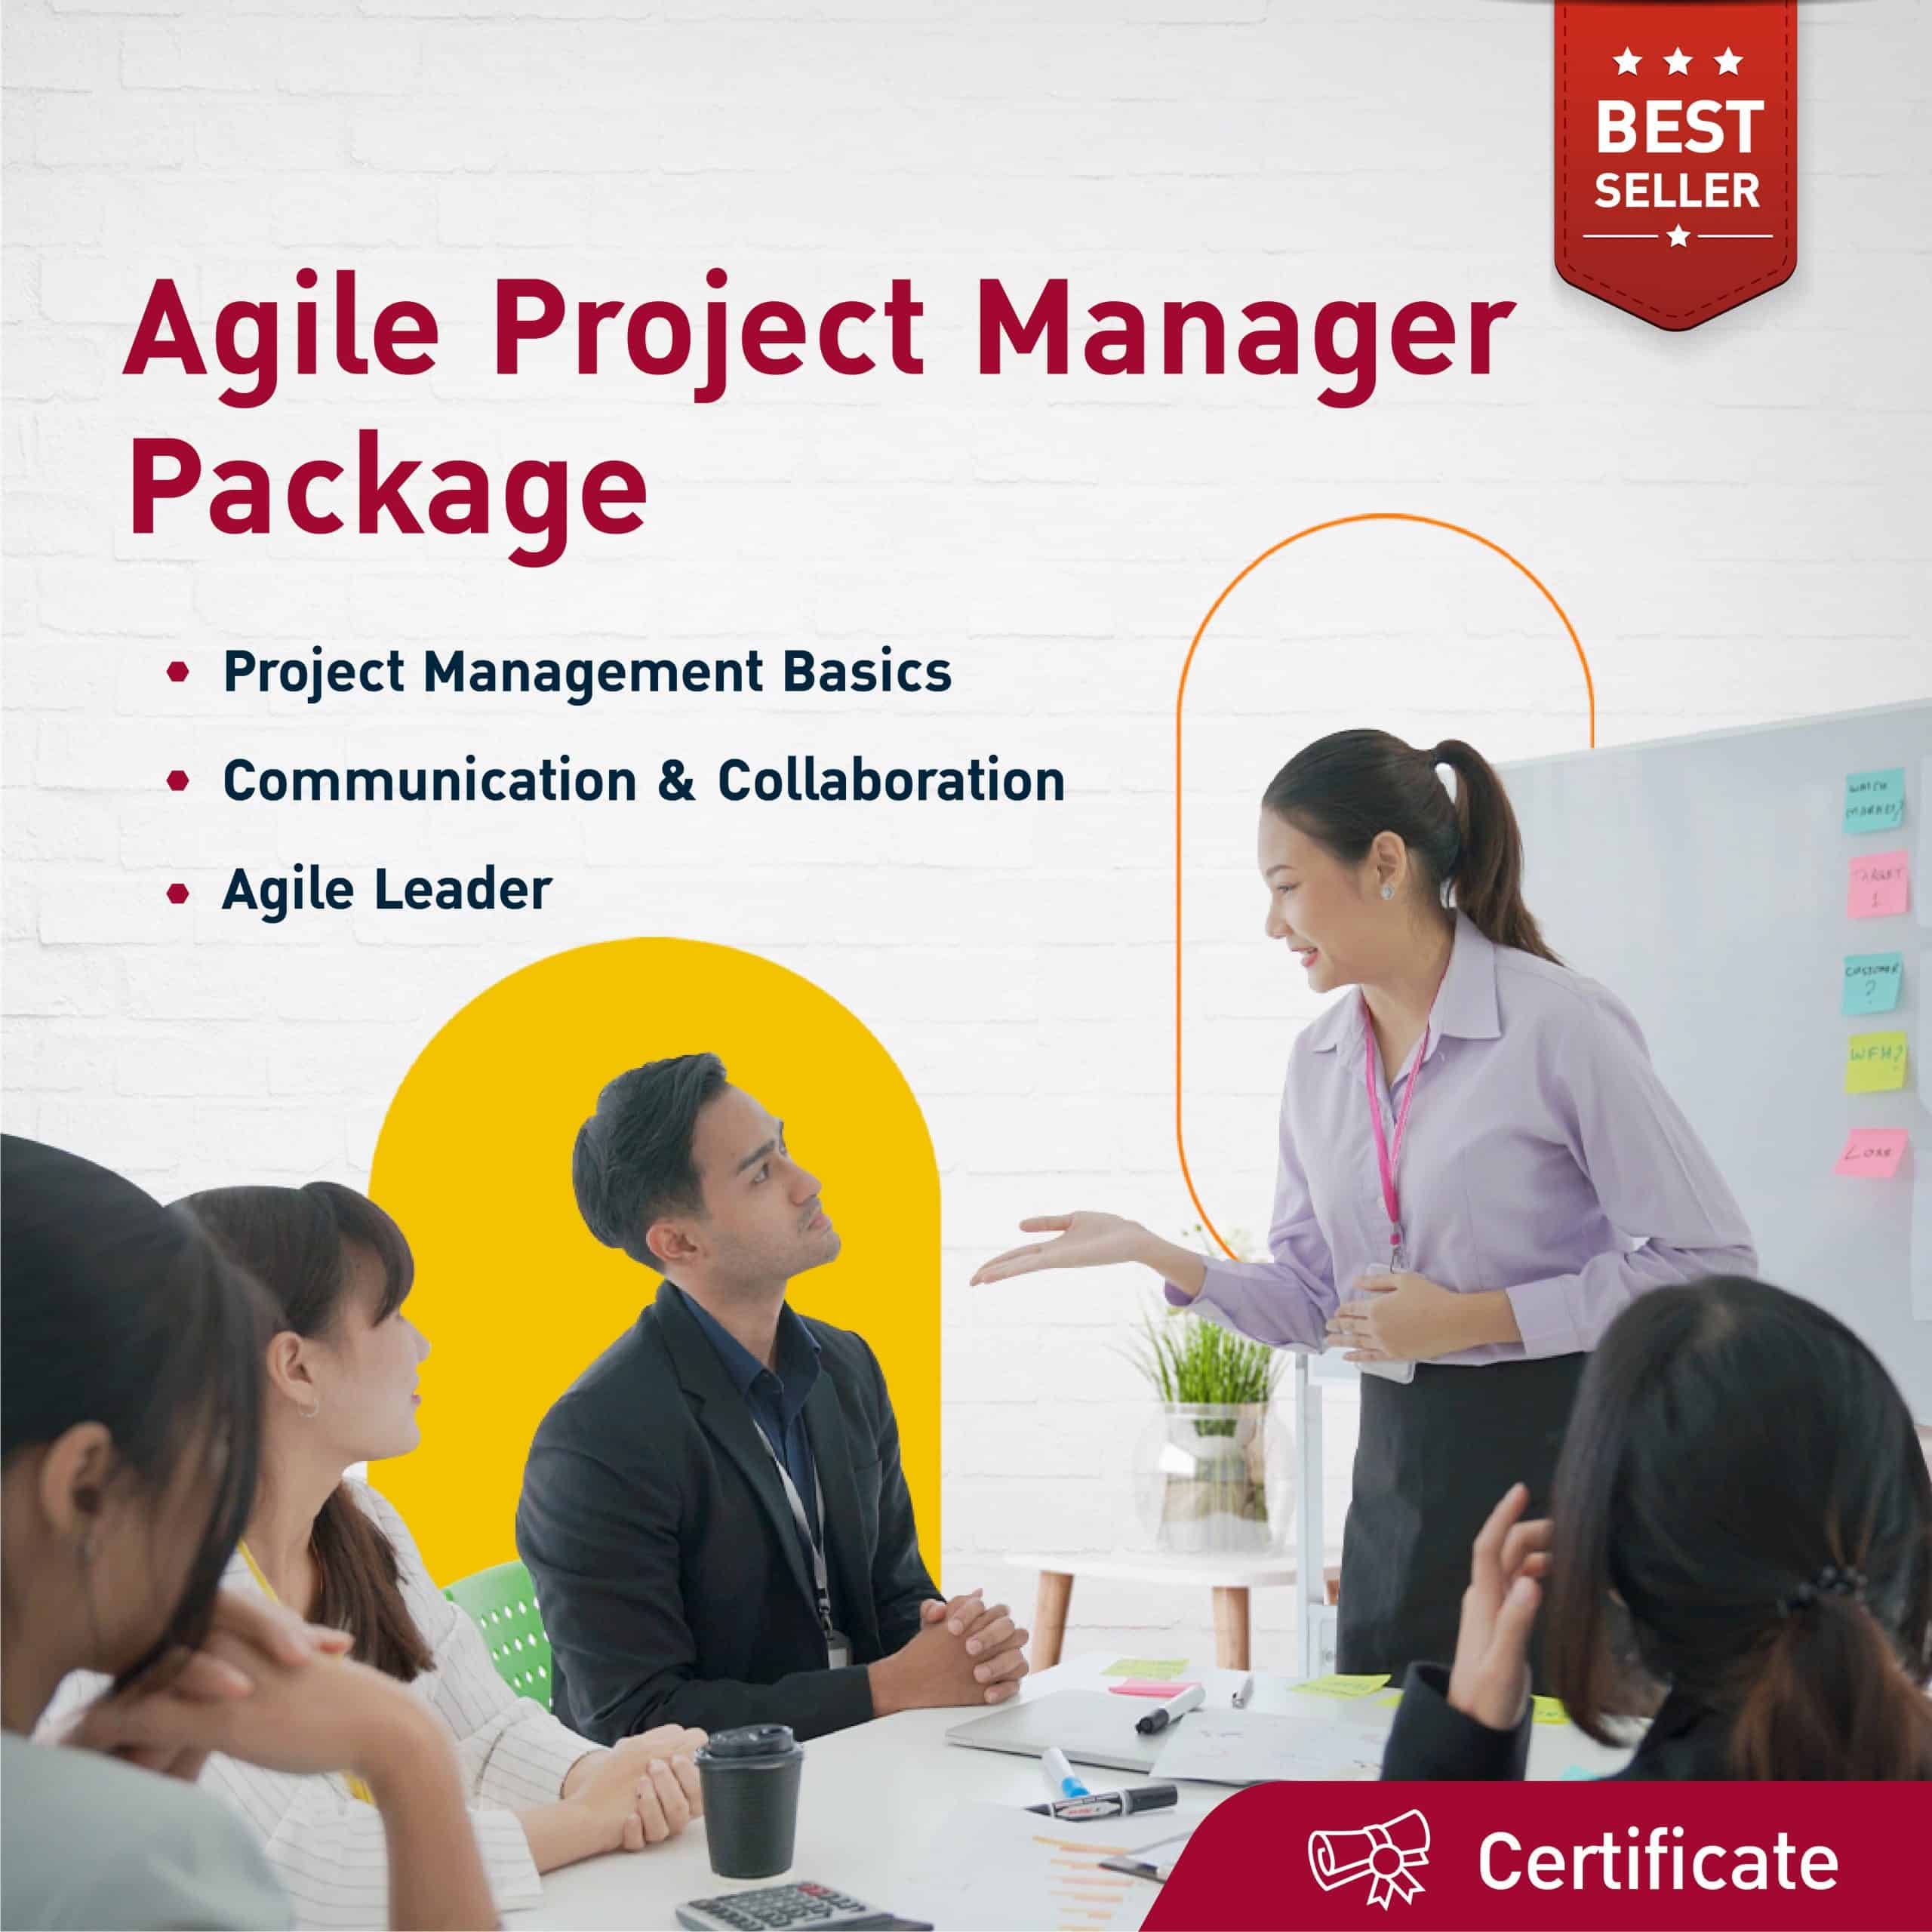 AW_Jobs Base Learning_Agile Project Manager Package__1080x1080 (1)